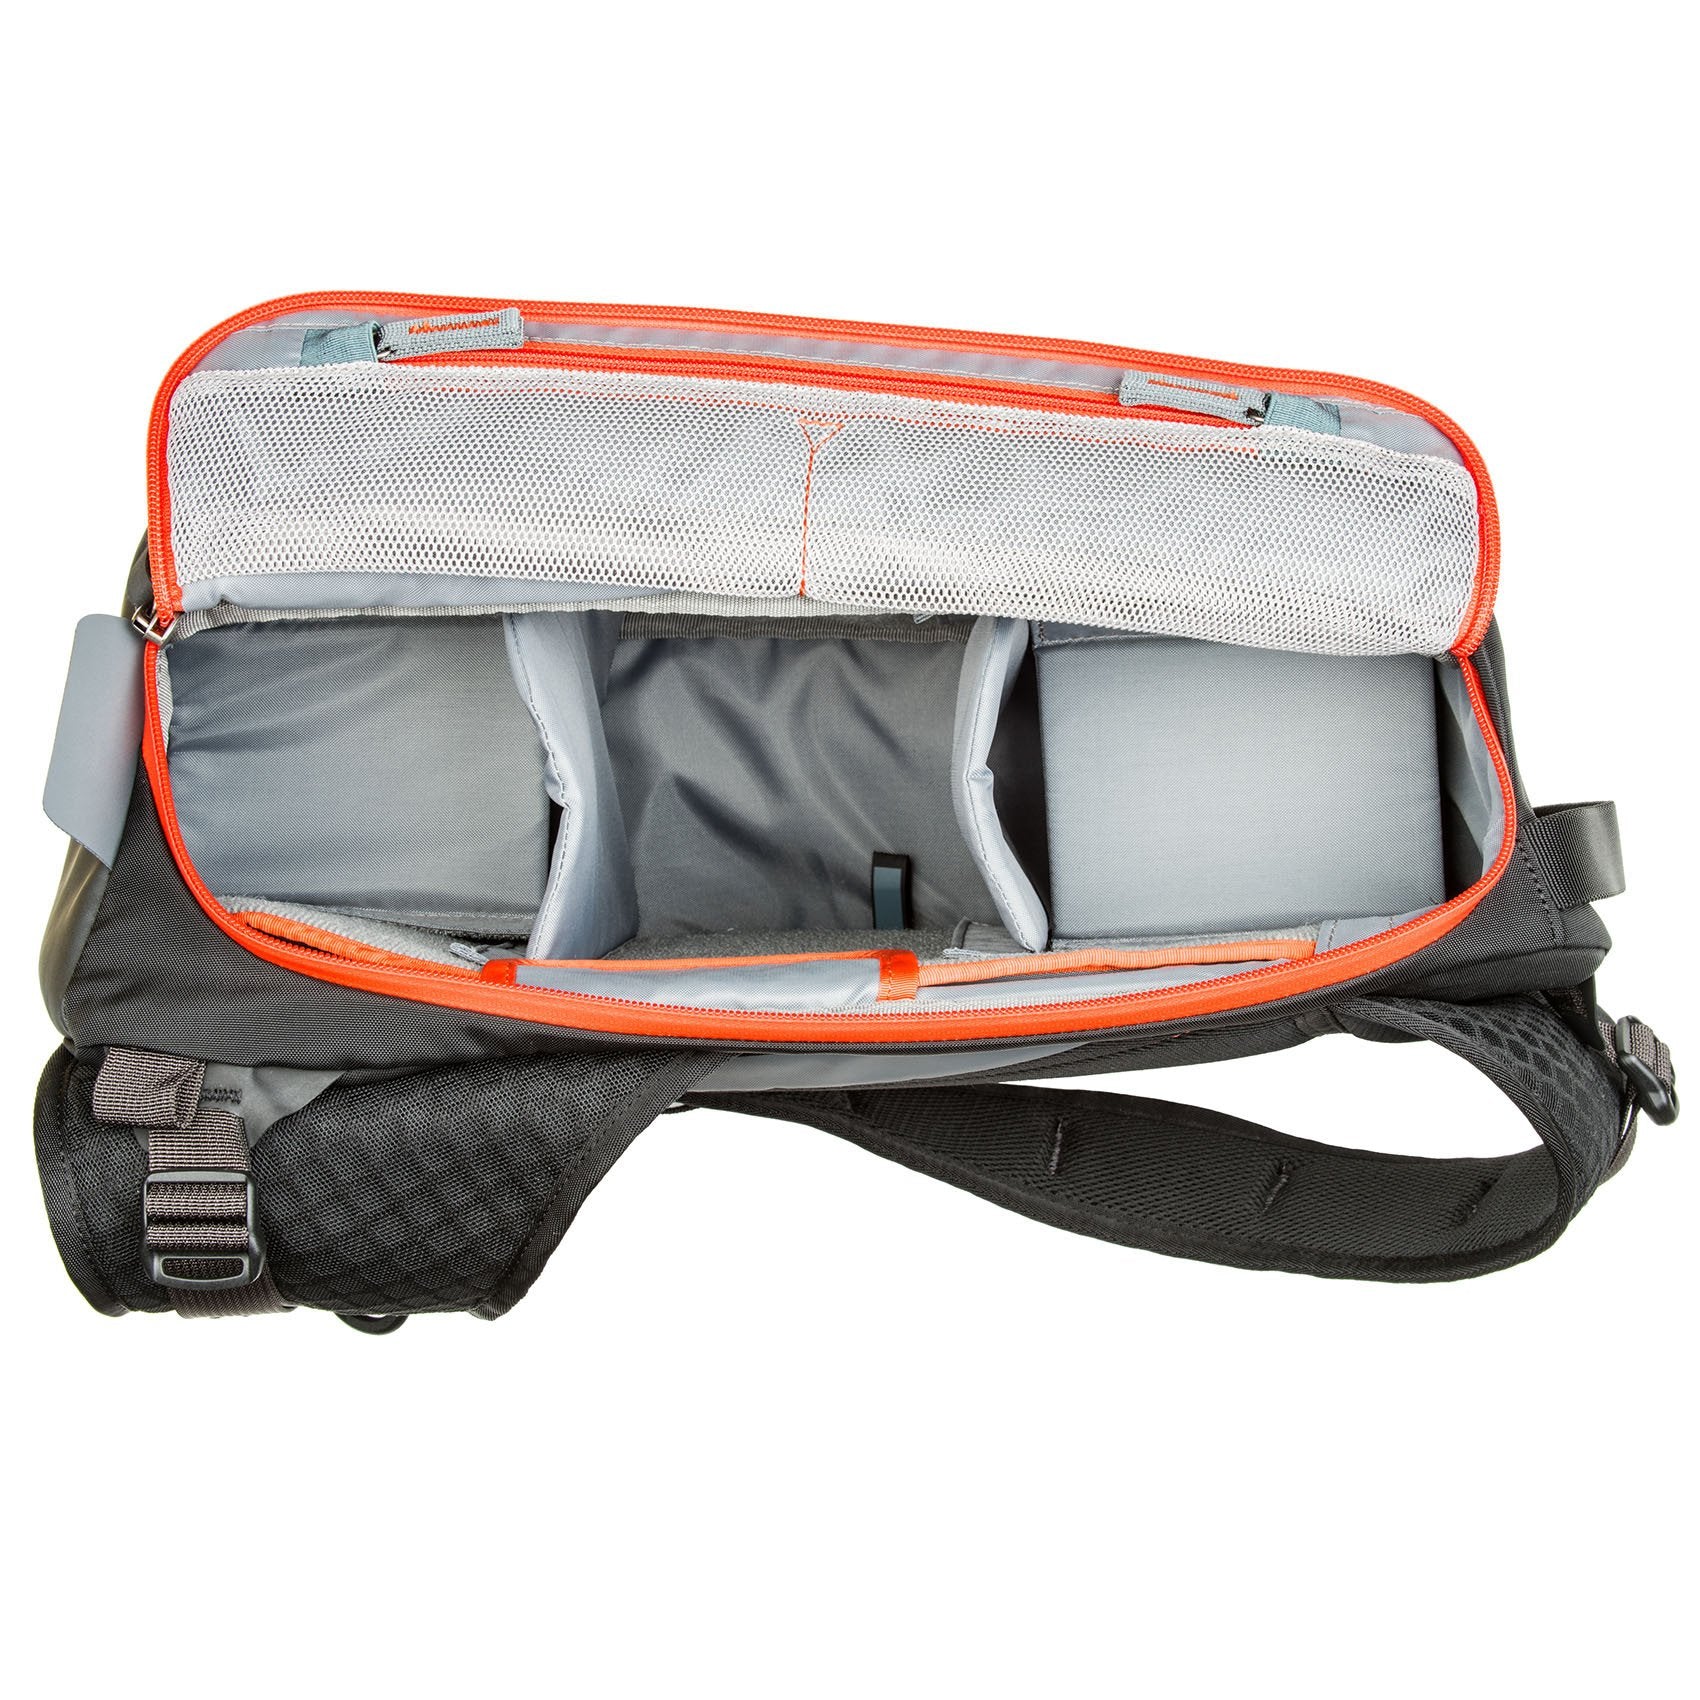 Fully customizable interior dividers for photo or personal gear